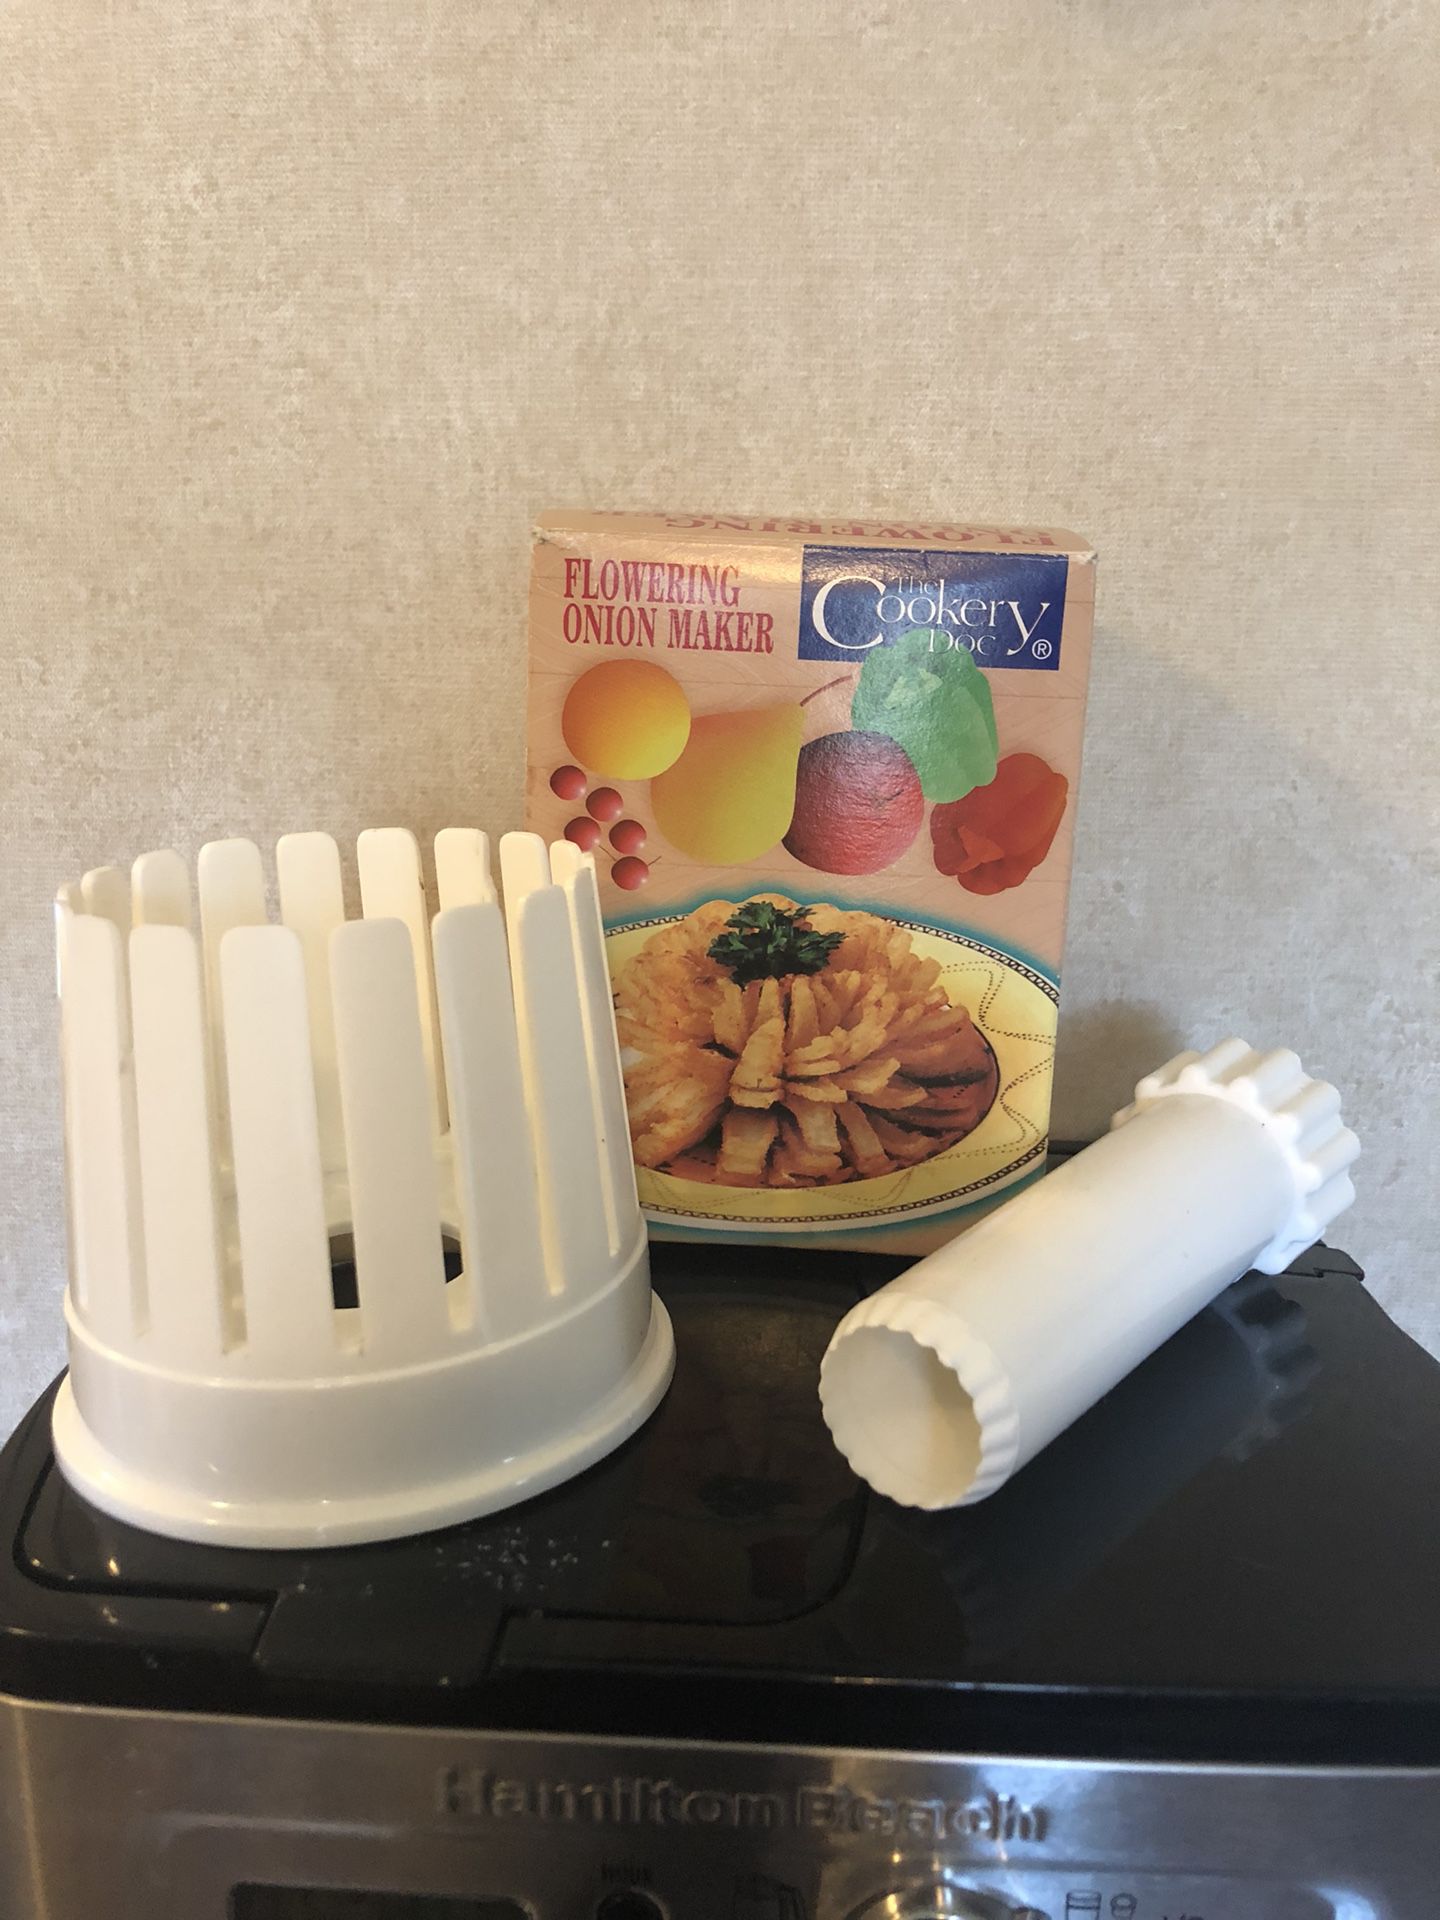 Great American Steakhouse Onion Machine Blooming Onion Maker with Box &  Manual for Sale in Yorkville, IL - OfferUp